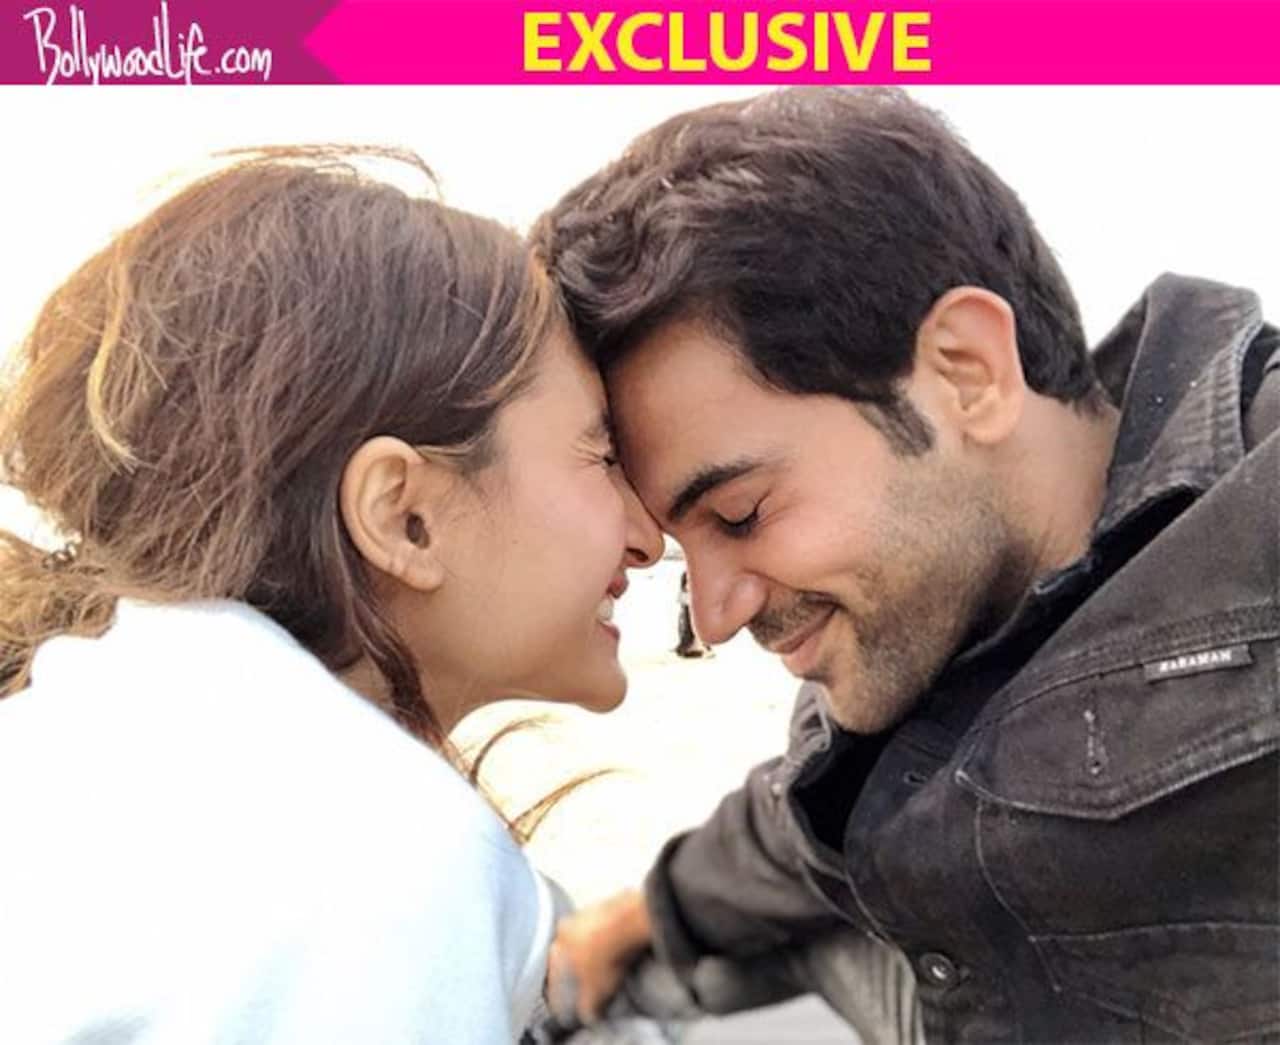 Rajkummar Rao opens up about his marriage plans with girlfriend Patralekhaa - watch exclusive video